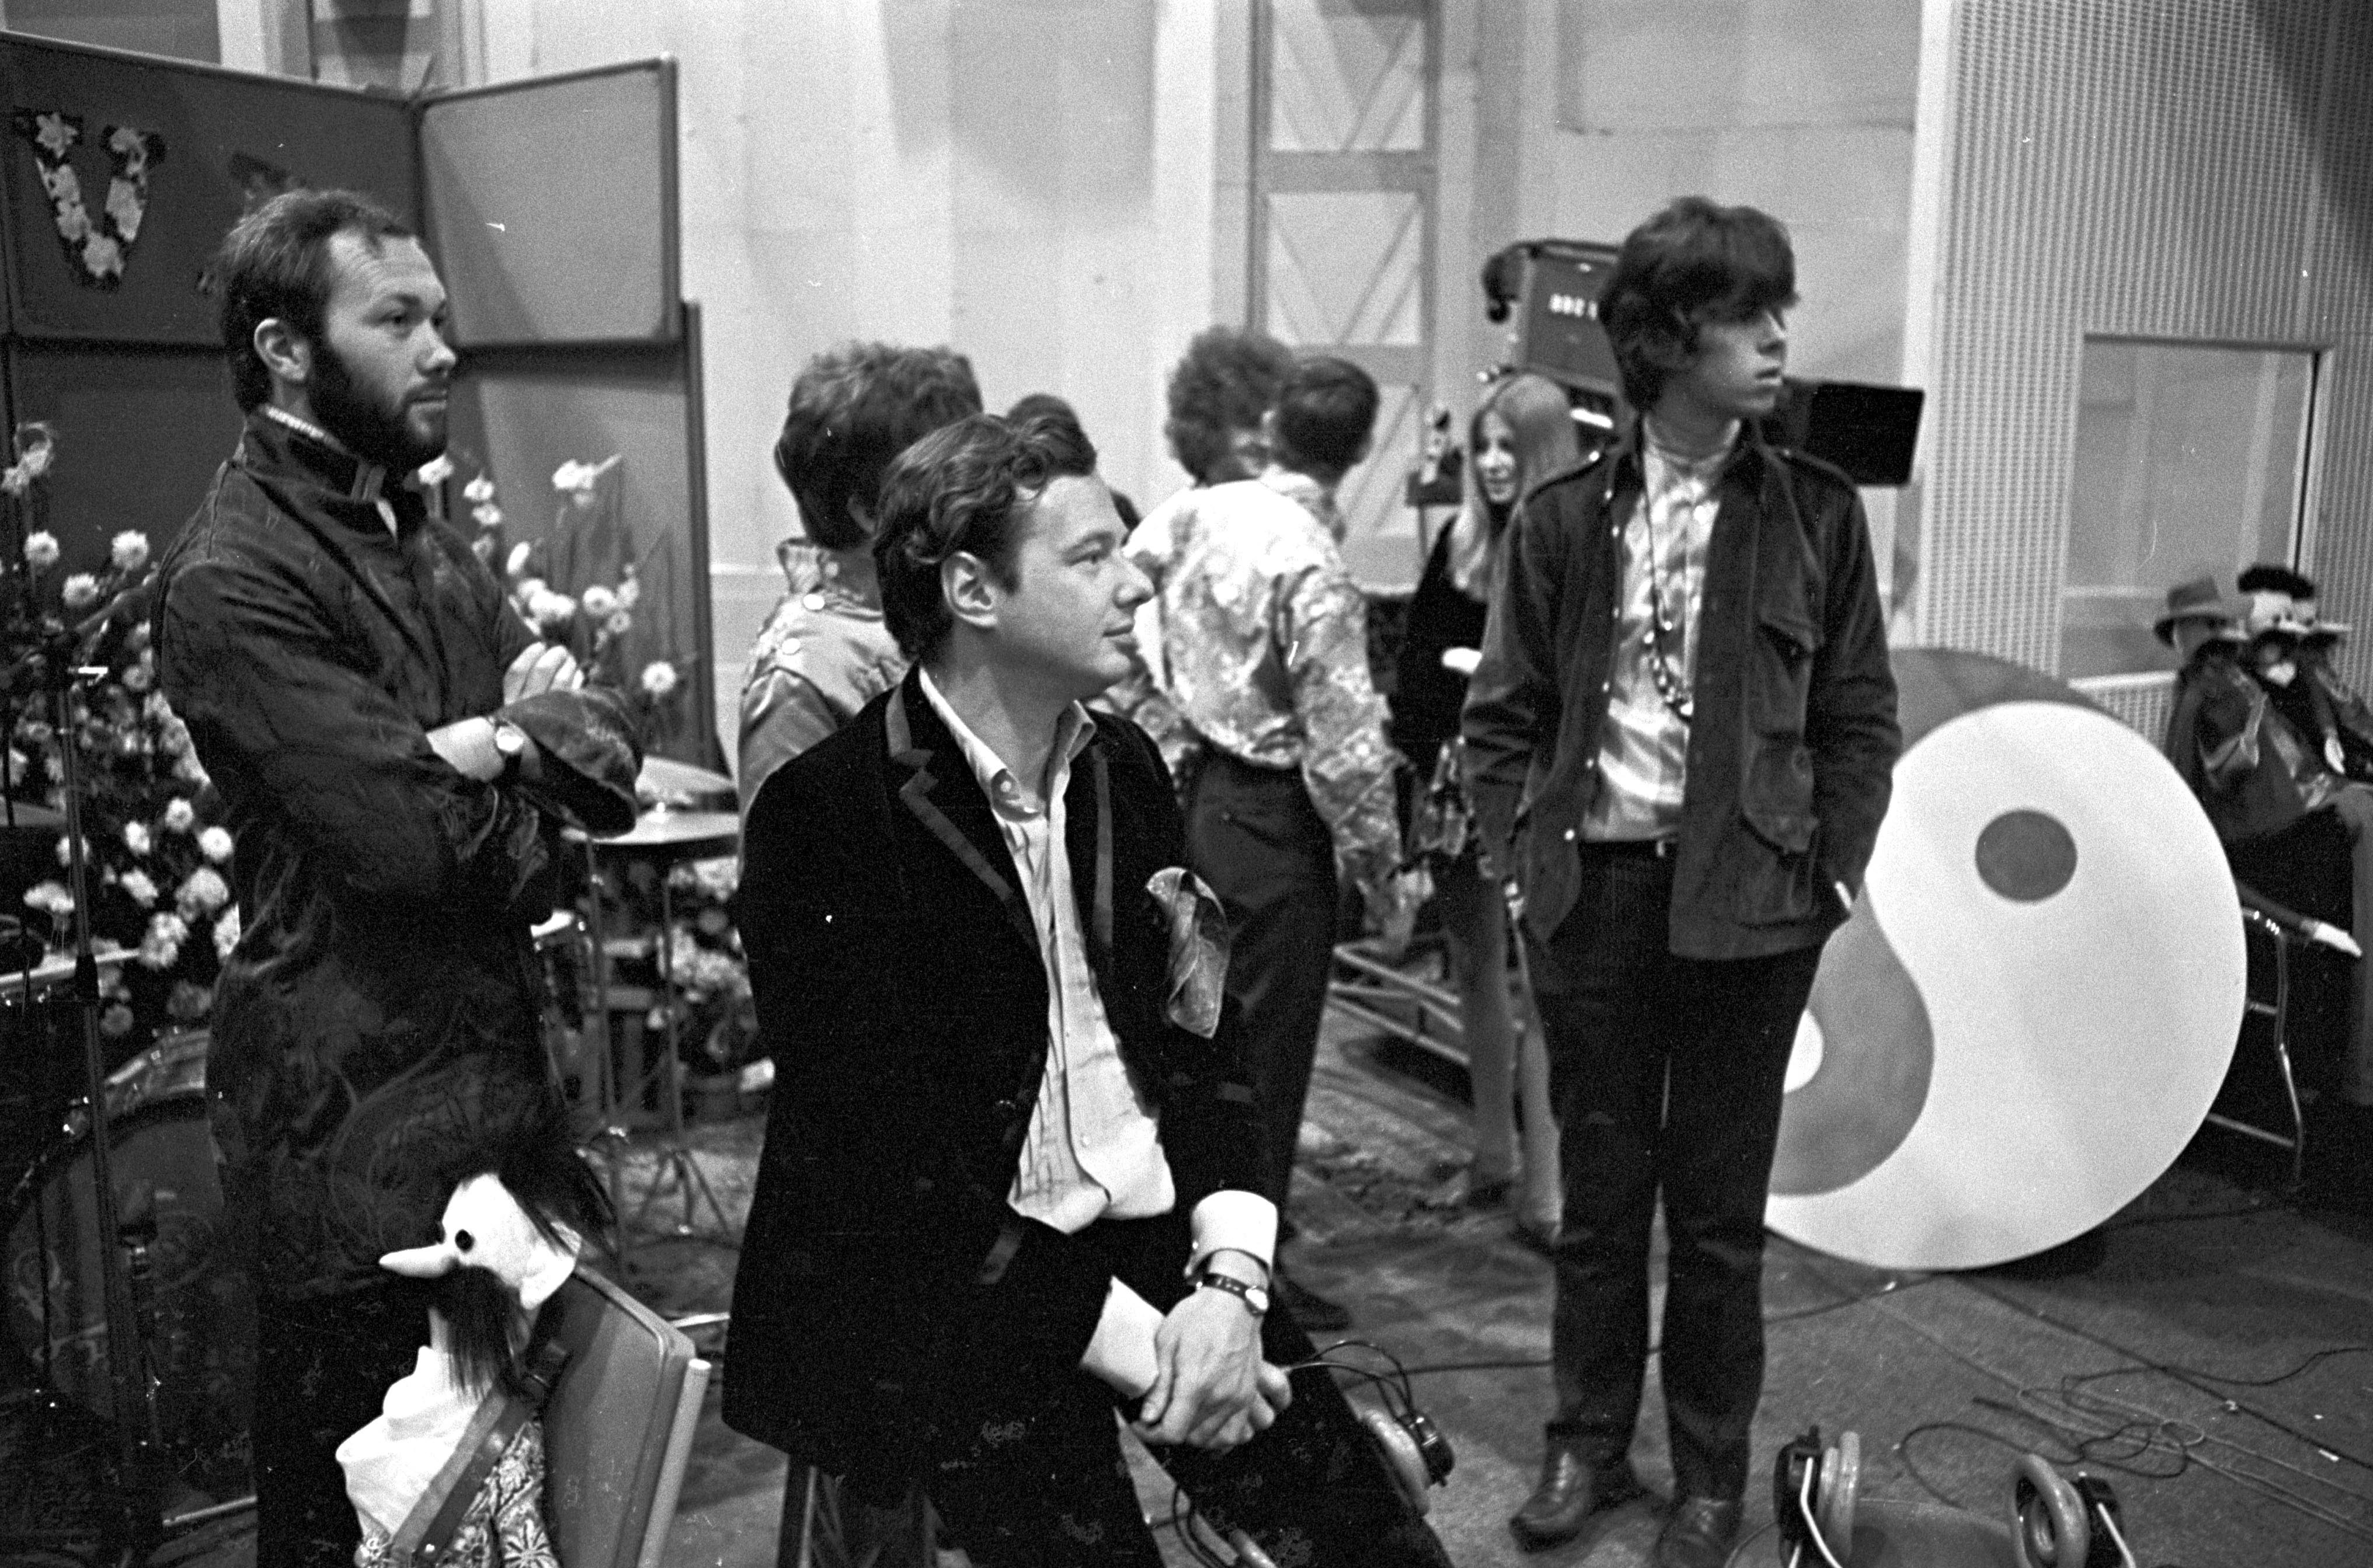 Bramwell pictured with Brian Epstein at Abbey Road Studios